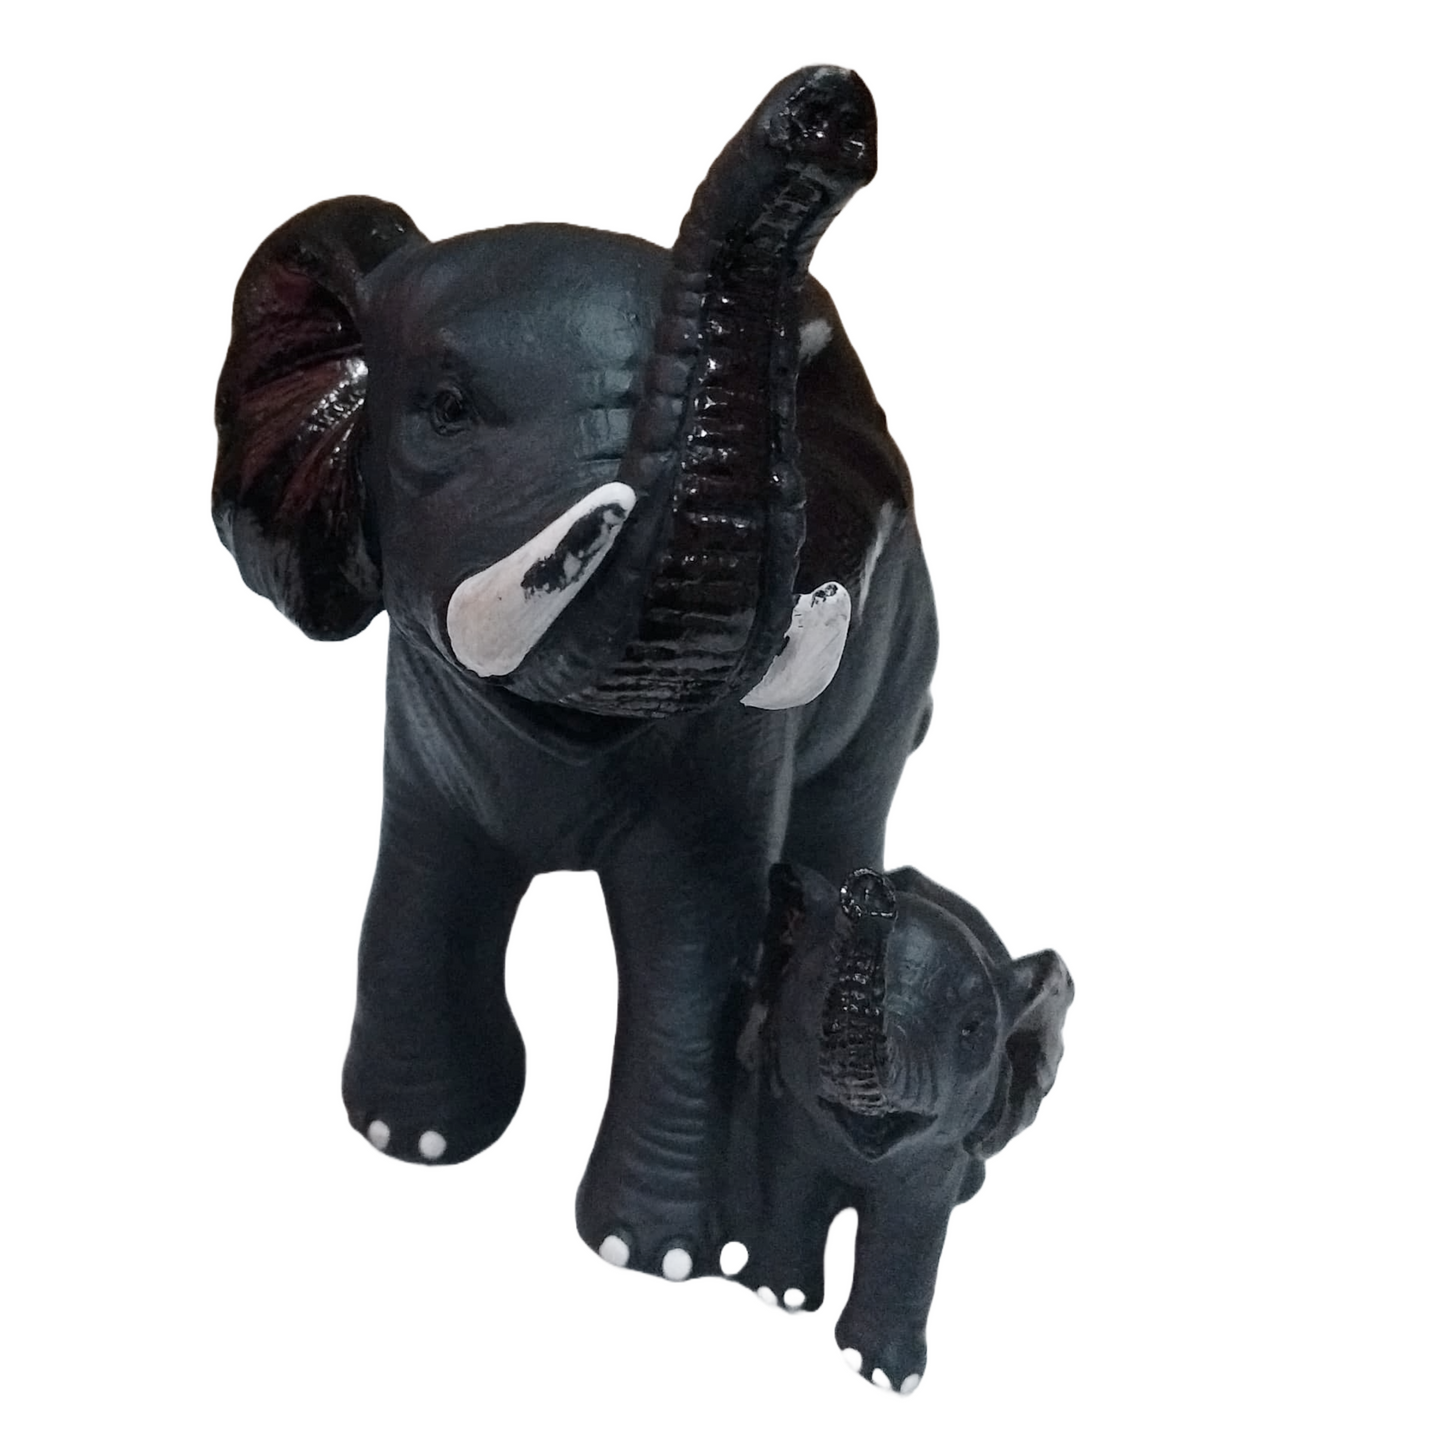 Statue ALiLA Black Elephant with Kid Statue Showpiece Idol for Gifting & Home Table Office Desk Decoration Figurines, White Marble, 8 Inches Height Statue